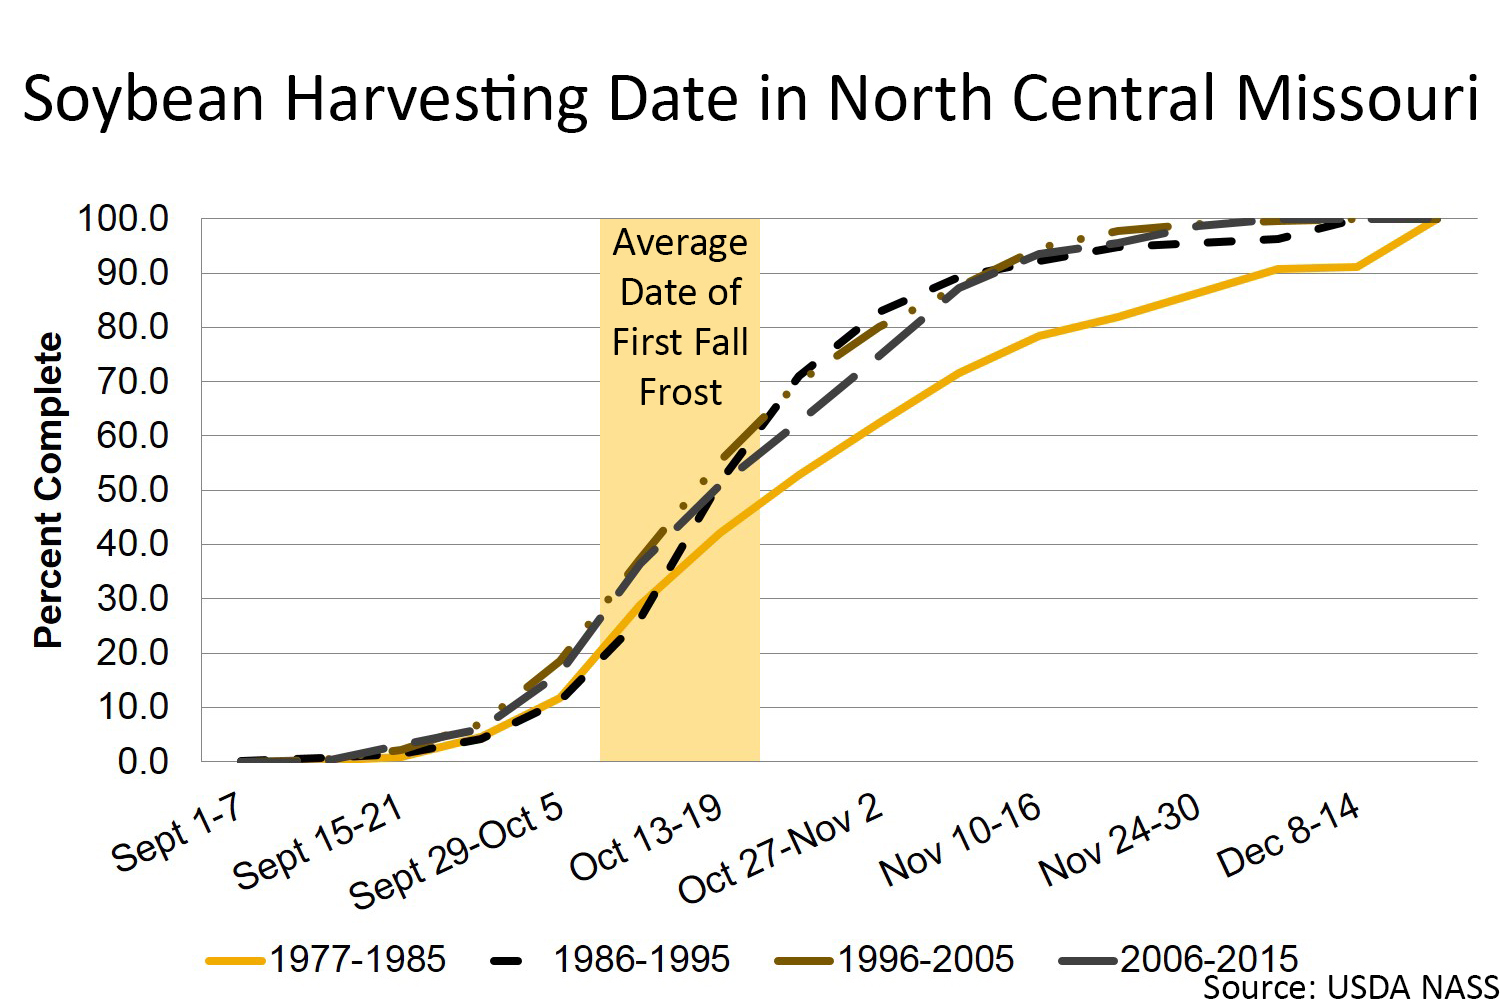 Soybean harvestng date in north central Missouri chart